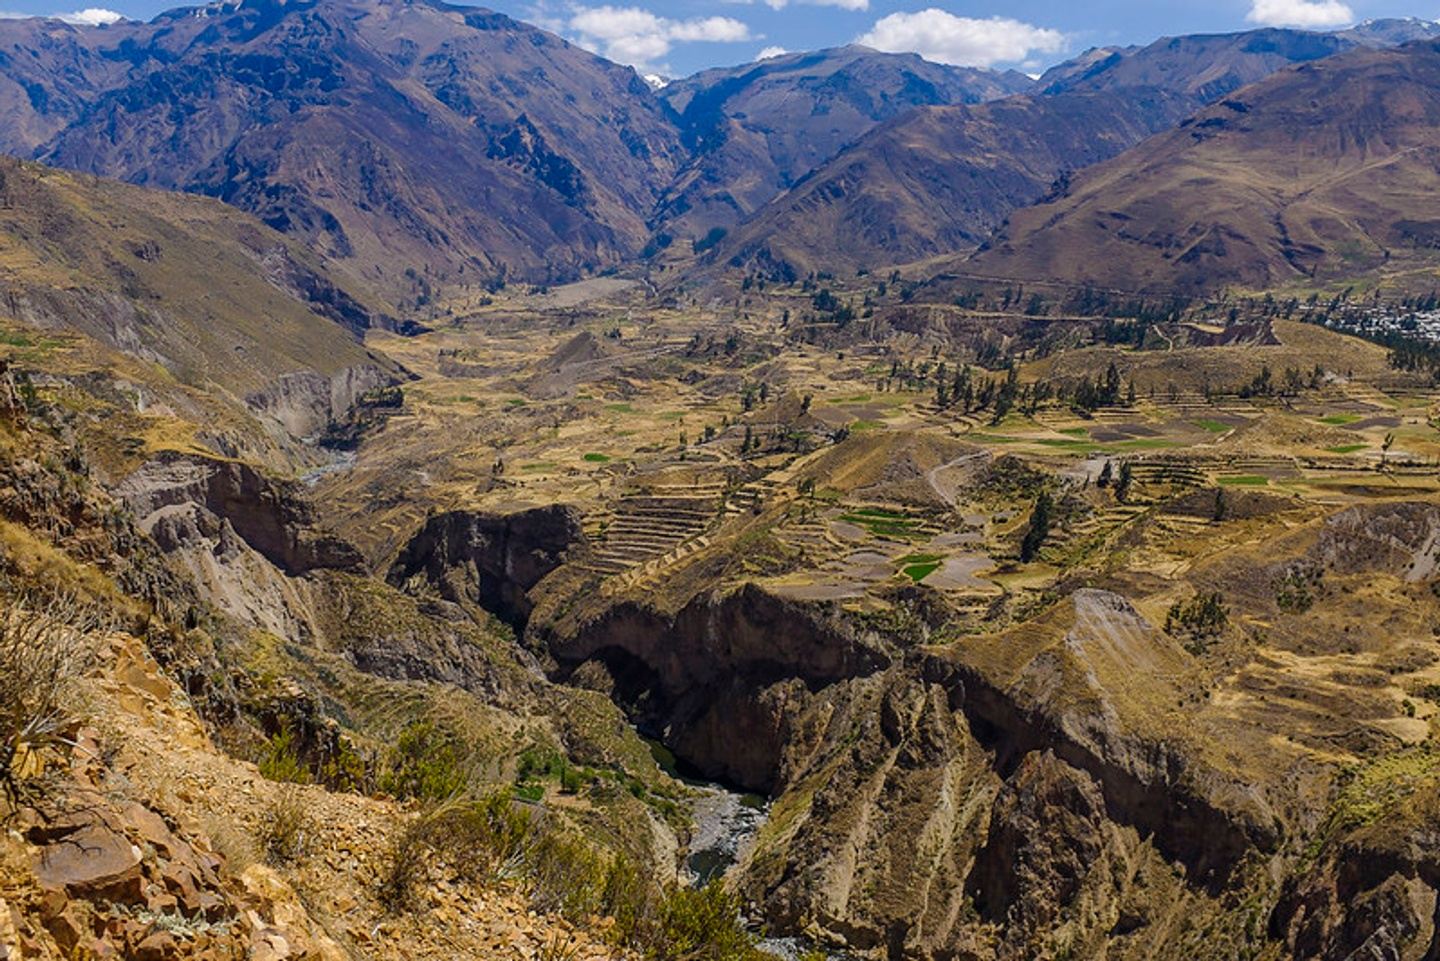 FULL DAY COLCA CANYON FROM AREQUIPA